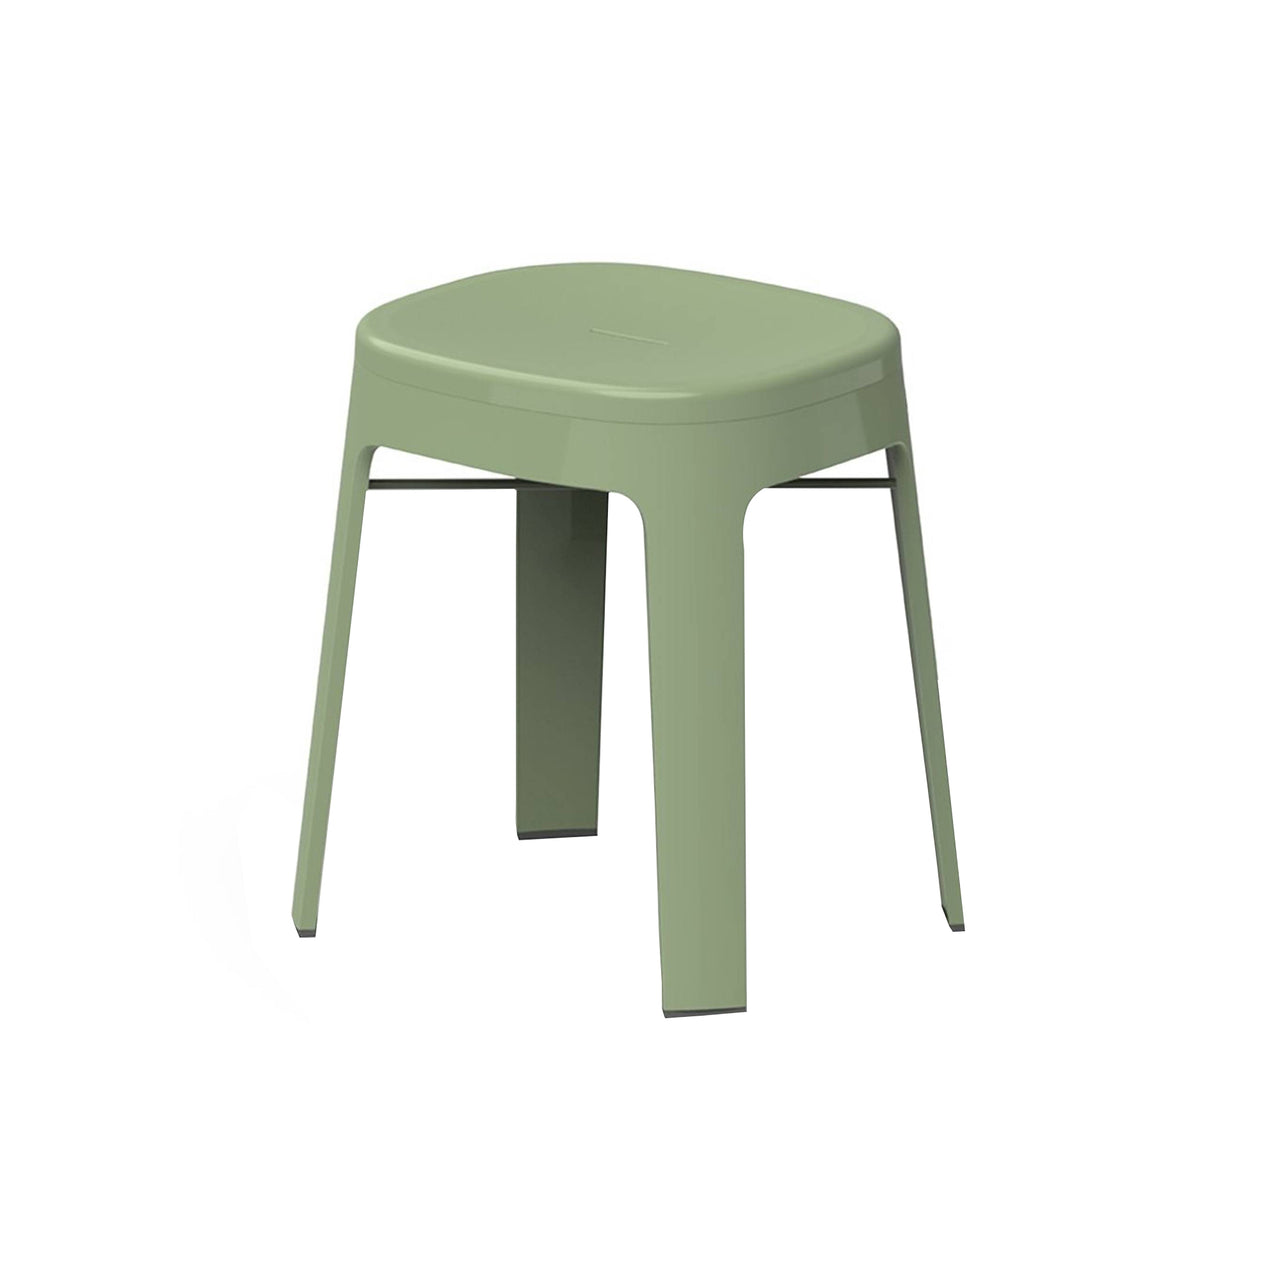 Ombra Stool: Stacking + Green